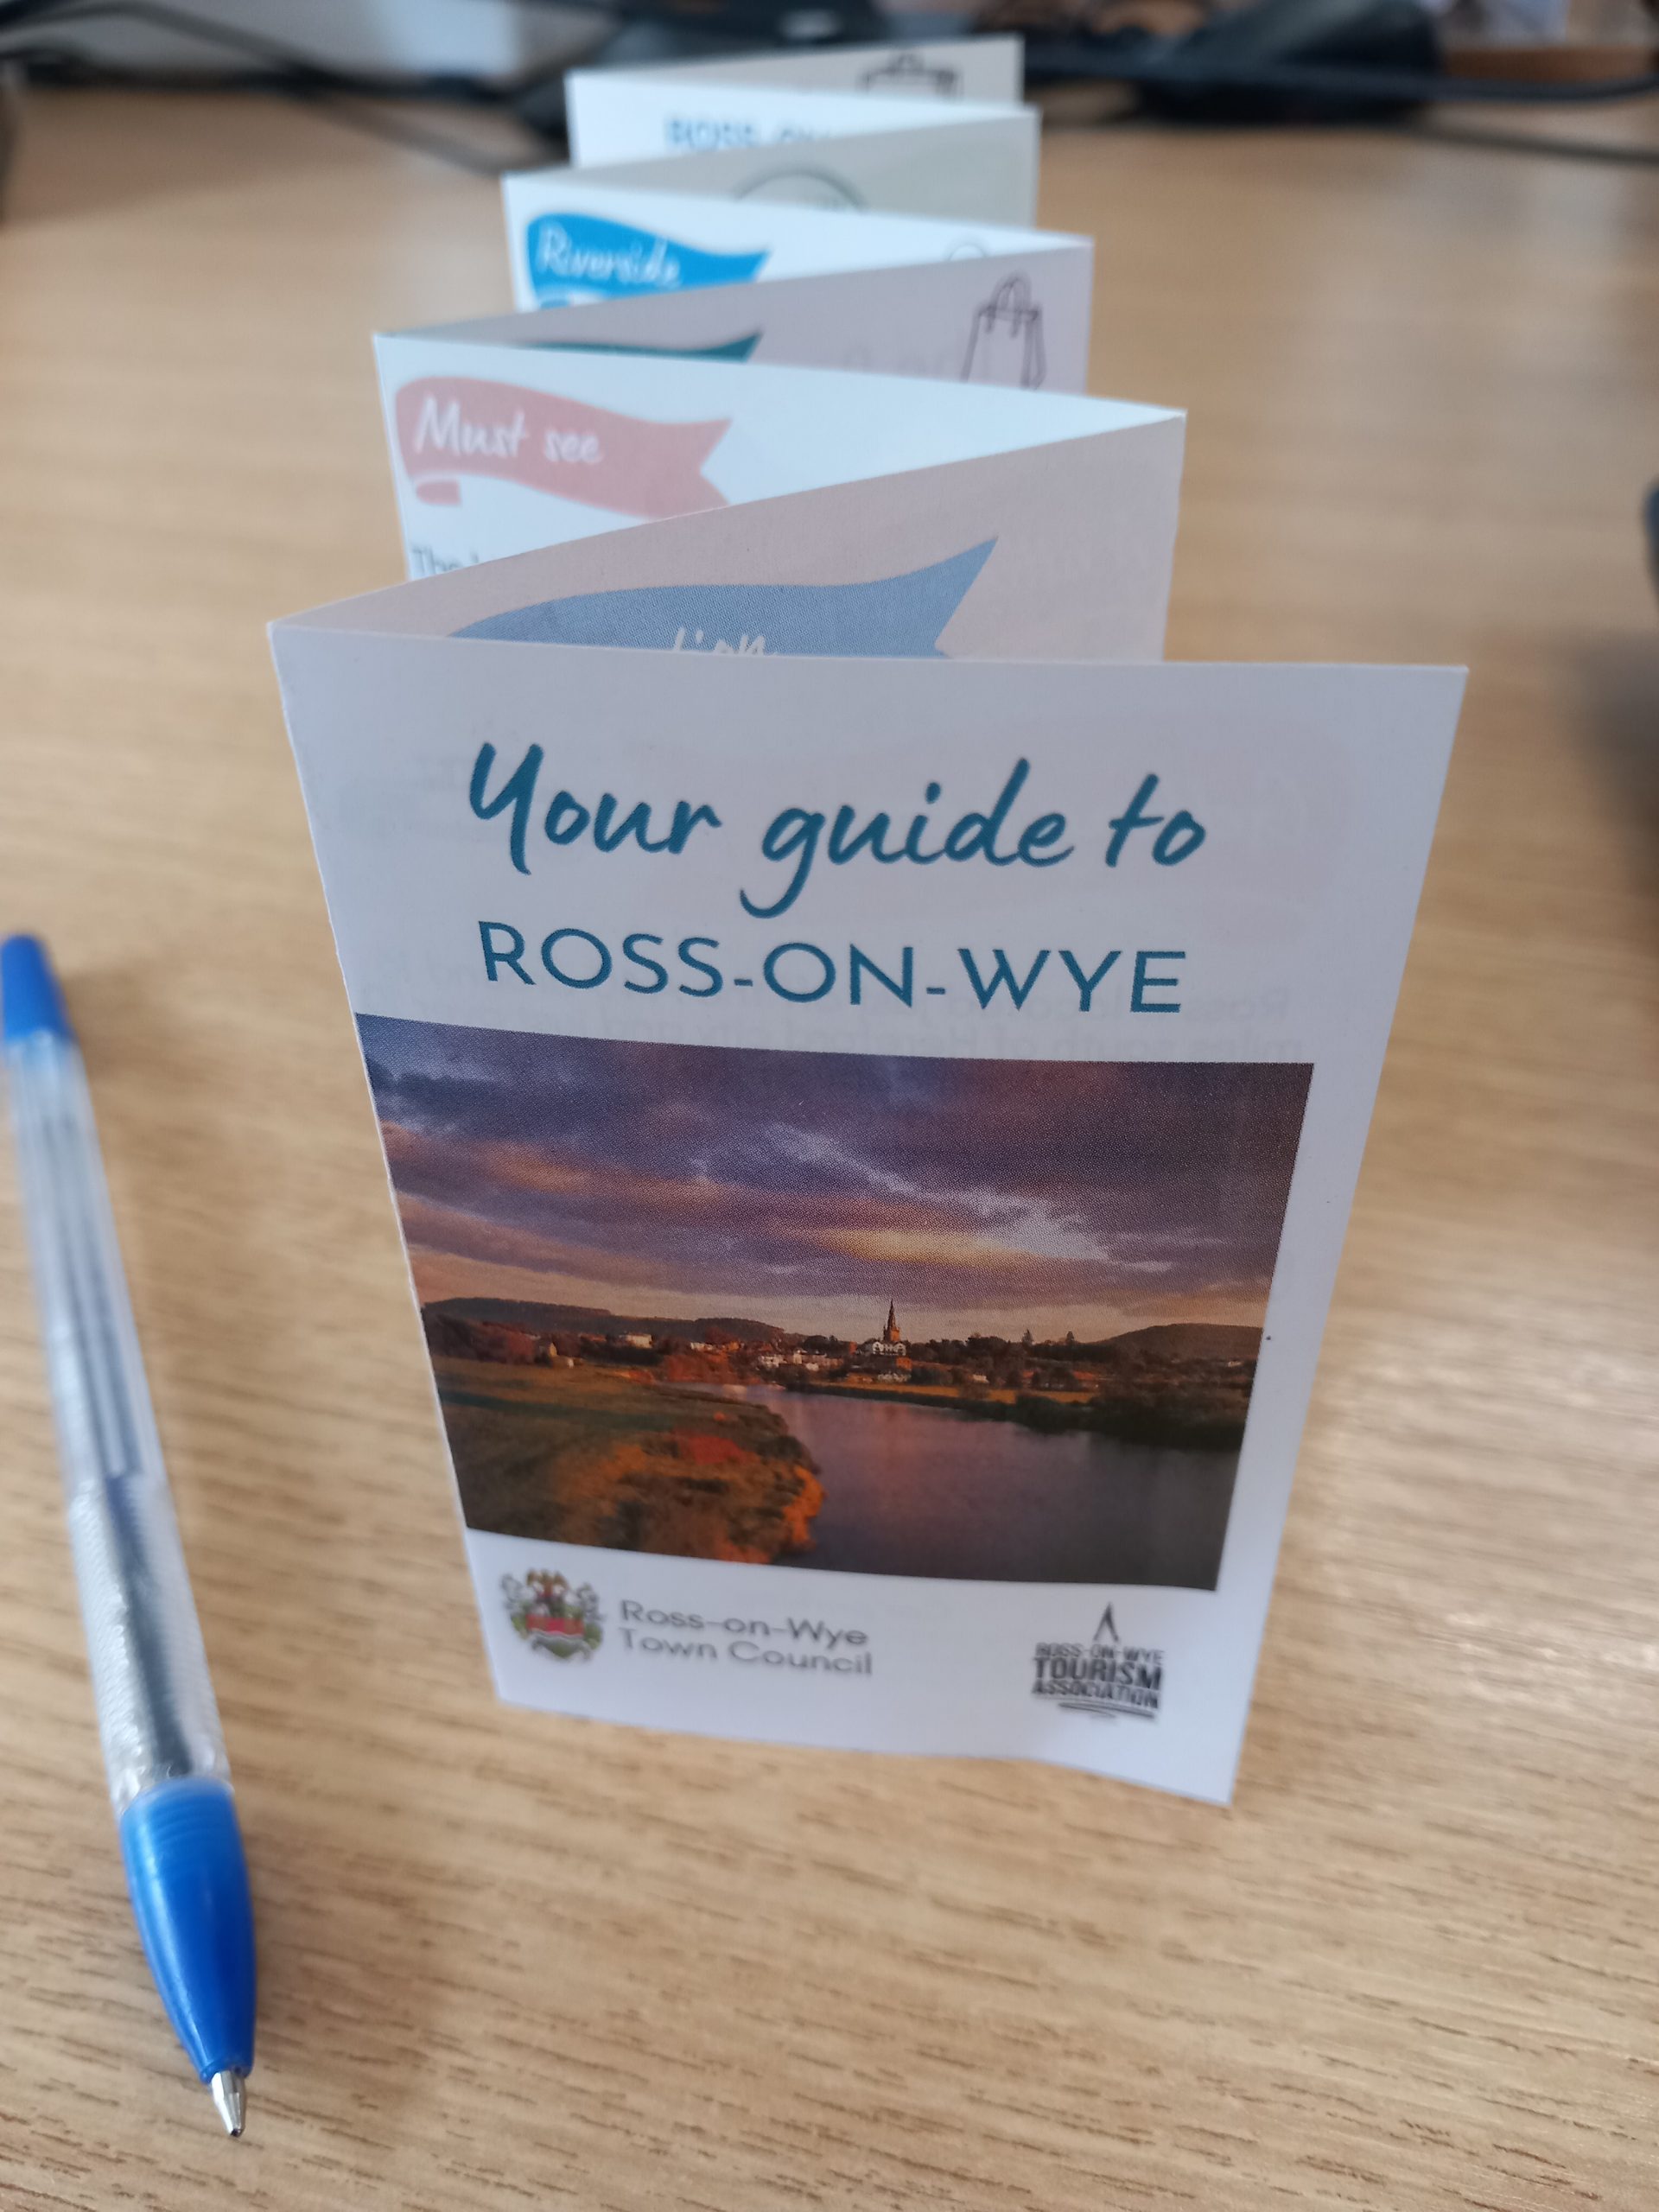 Photo of the mini concertina tourism guide, 'Your Guide to Ross-on-Wye'